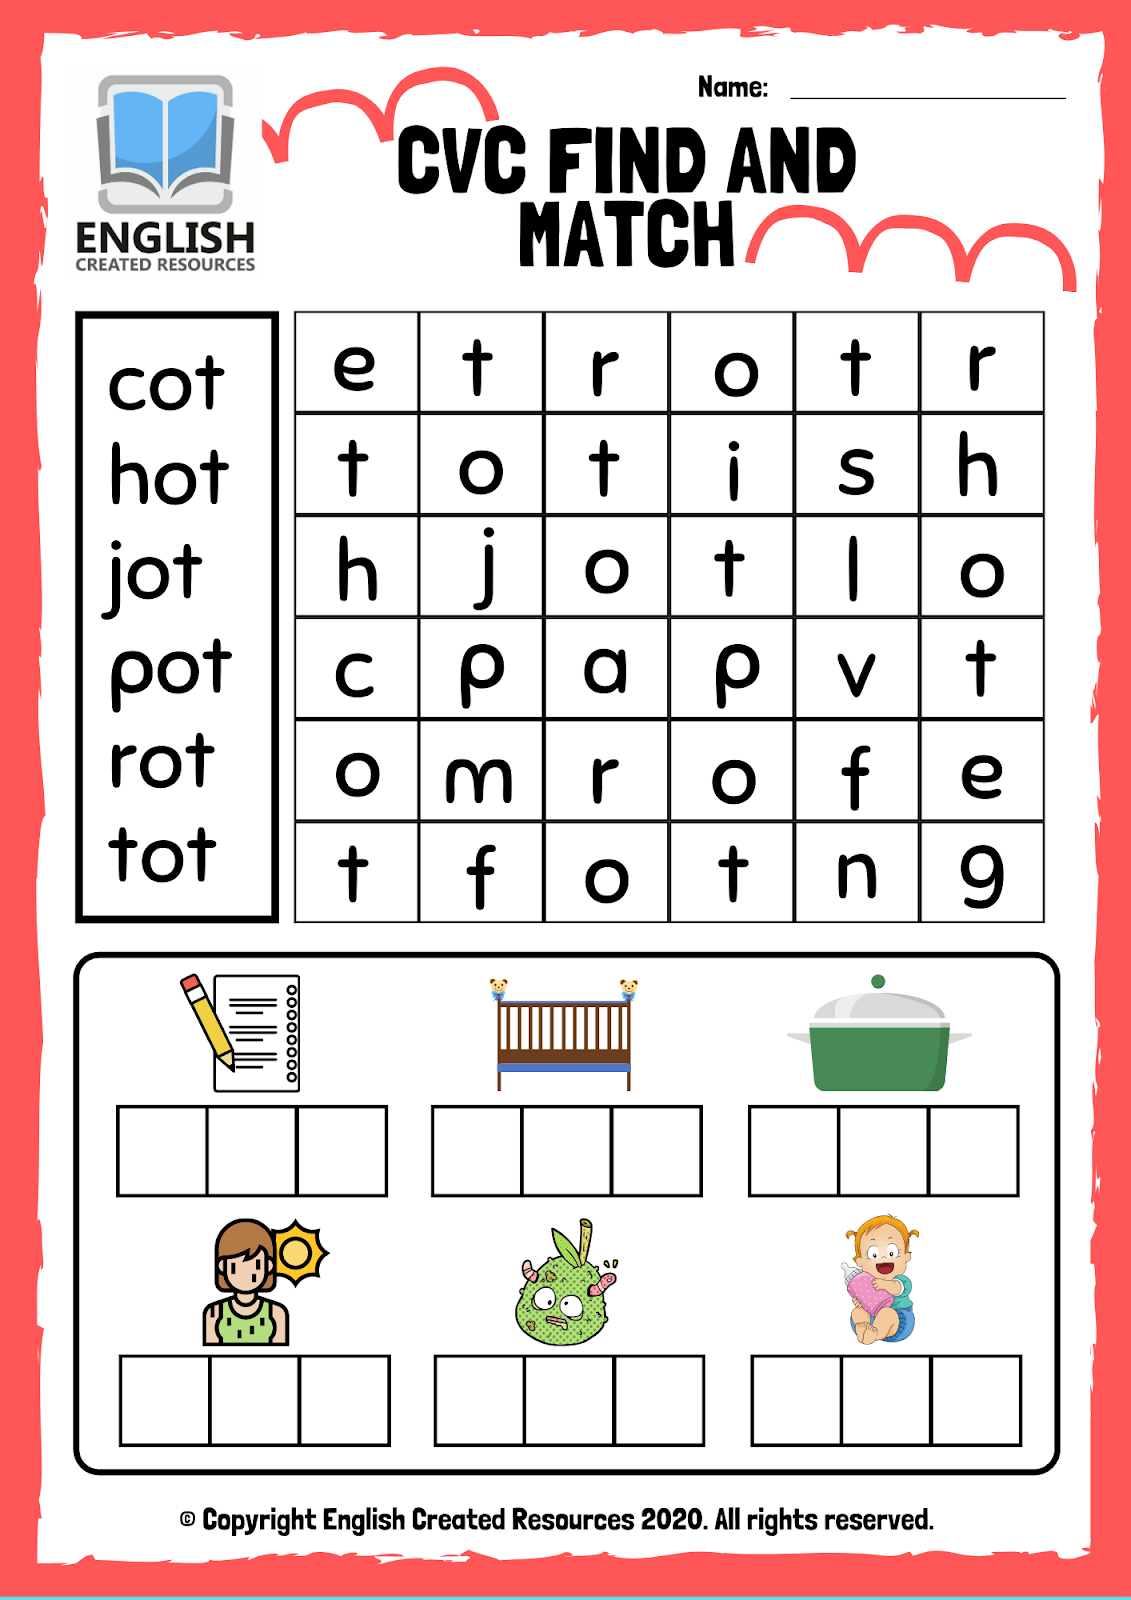 CVC Words Find and Match Worksheets - English Created Resources